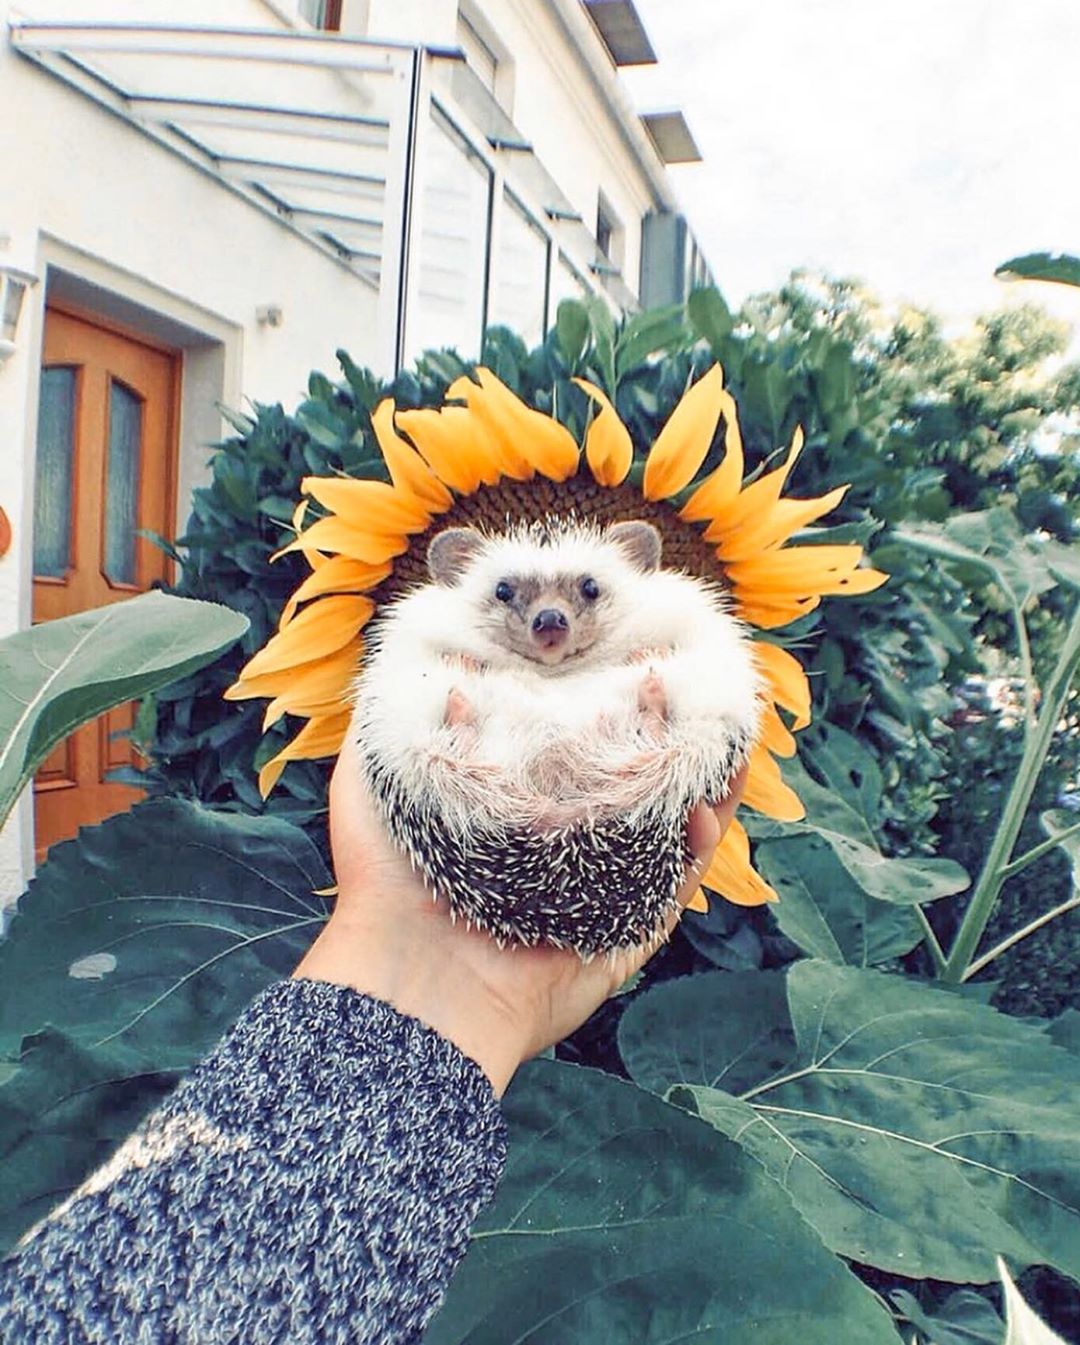 Pictures in sunflowers